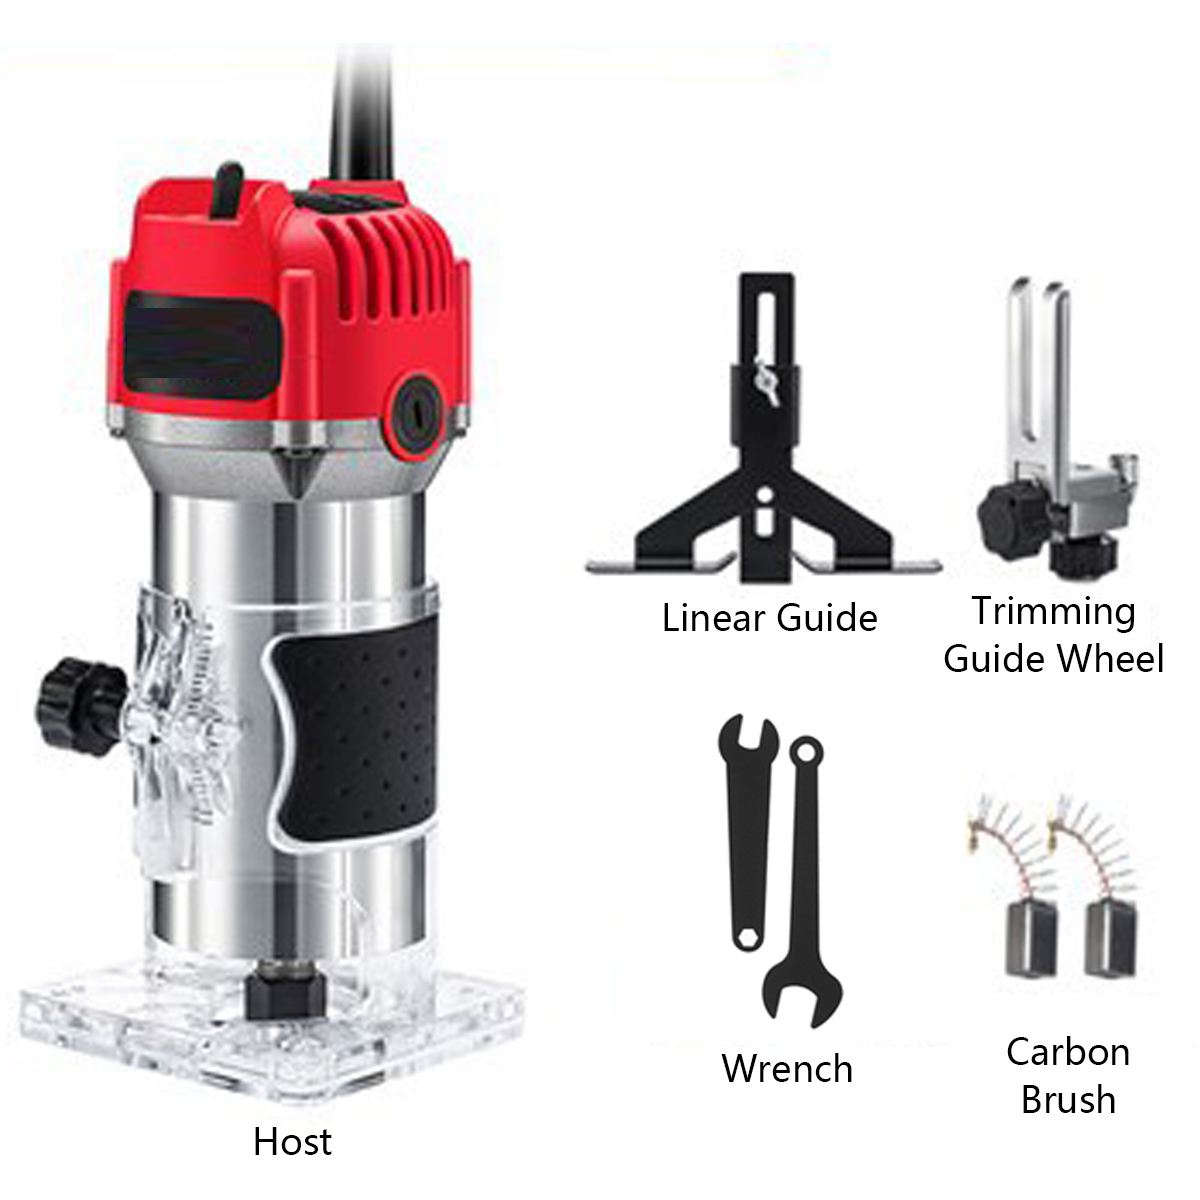 20000rpm-Electric-Hand-Trimmer-Router-Wood-Laminate-Palm-Joiners-Working-Cutting-Tool-1830153-11